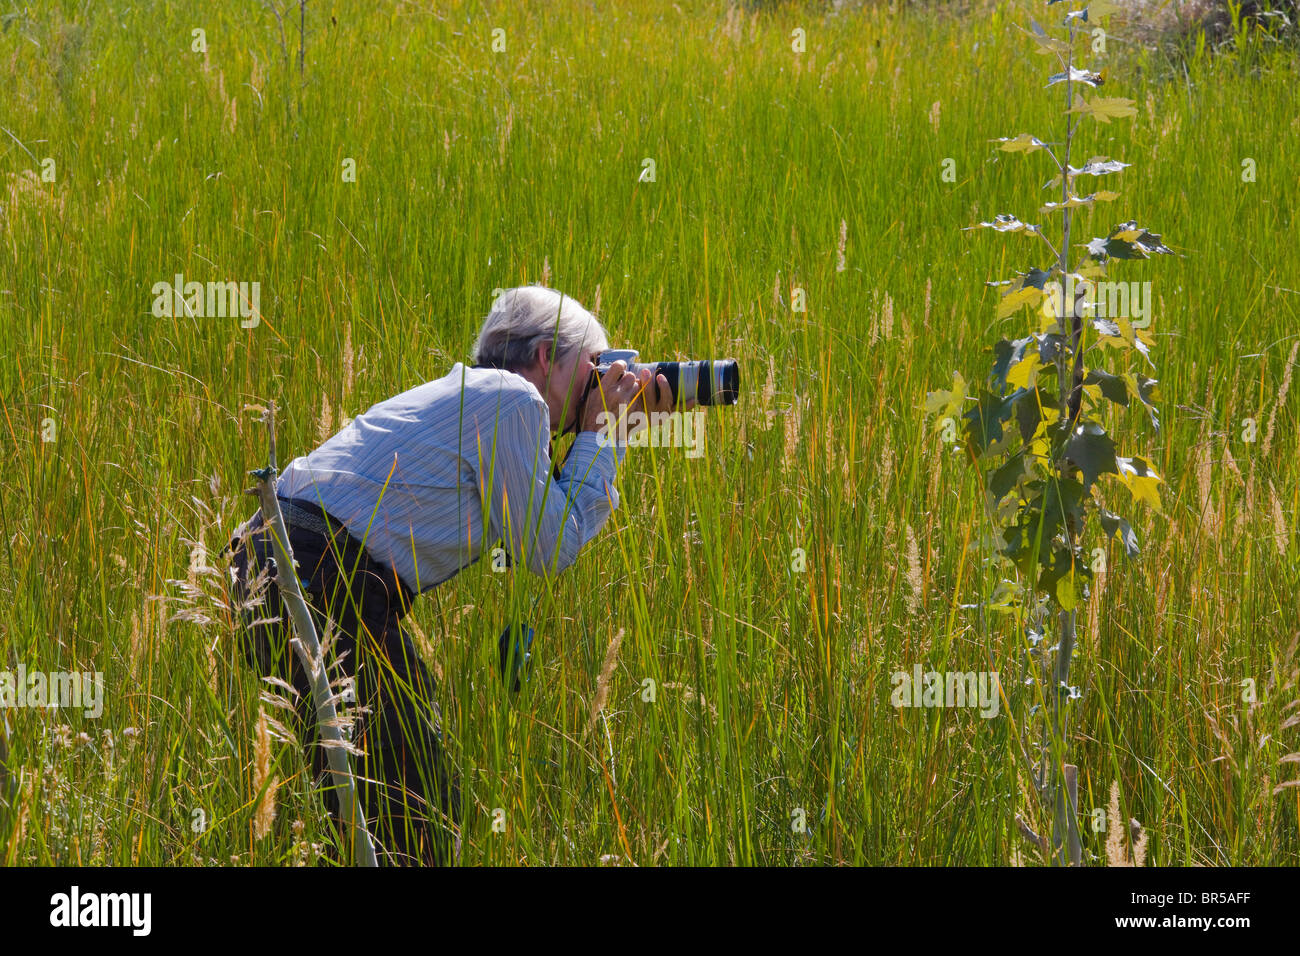 Western tourist photographing in the grass,  Xinjiang, China Stock Photo